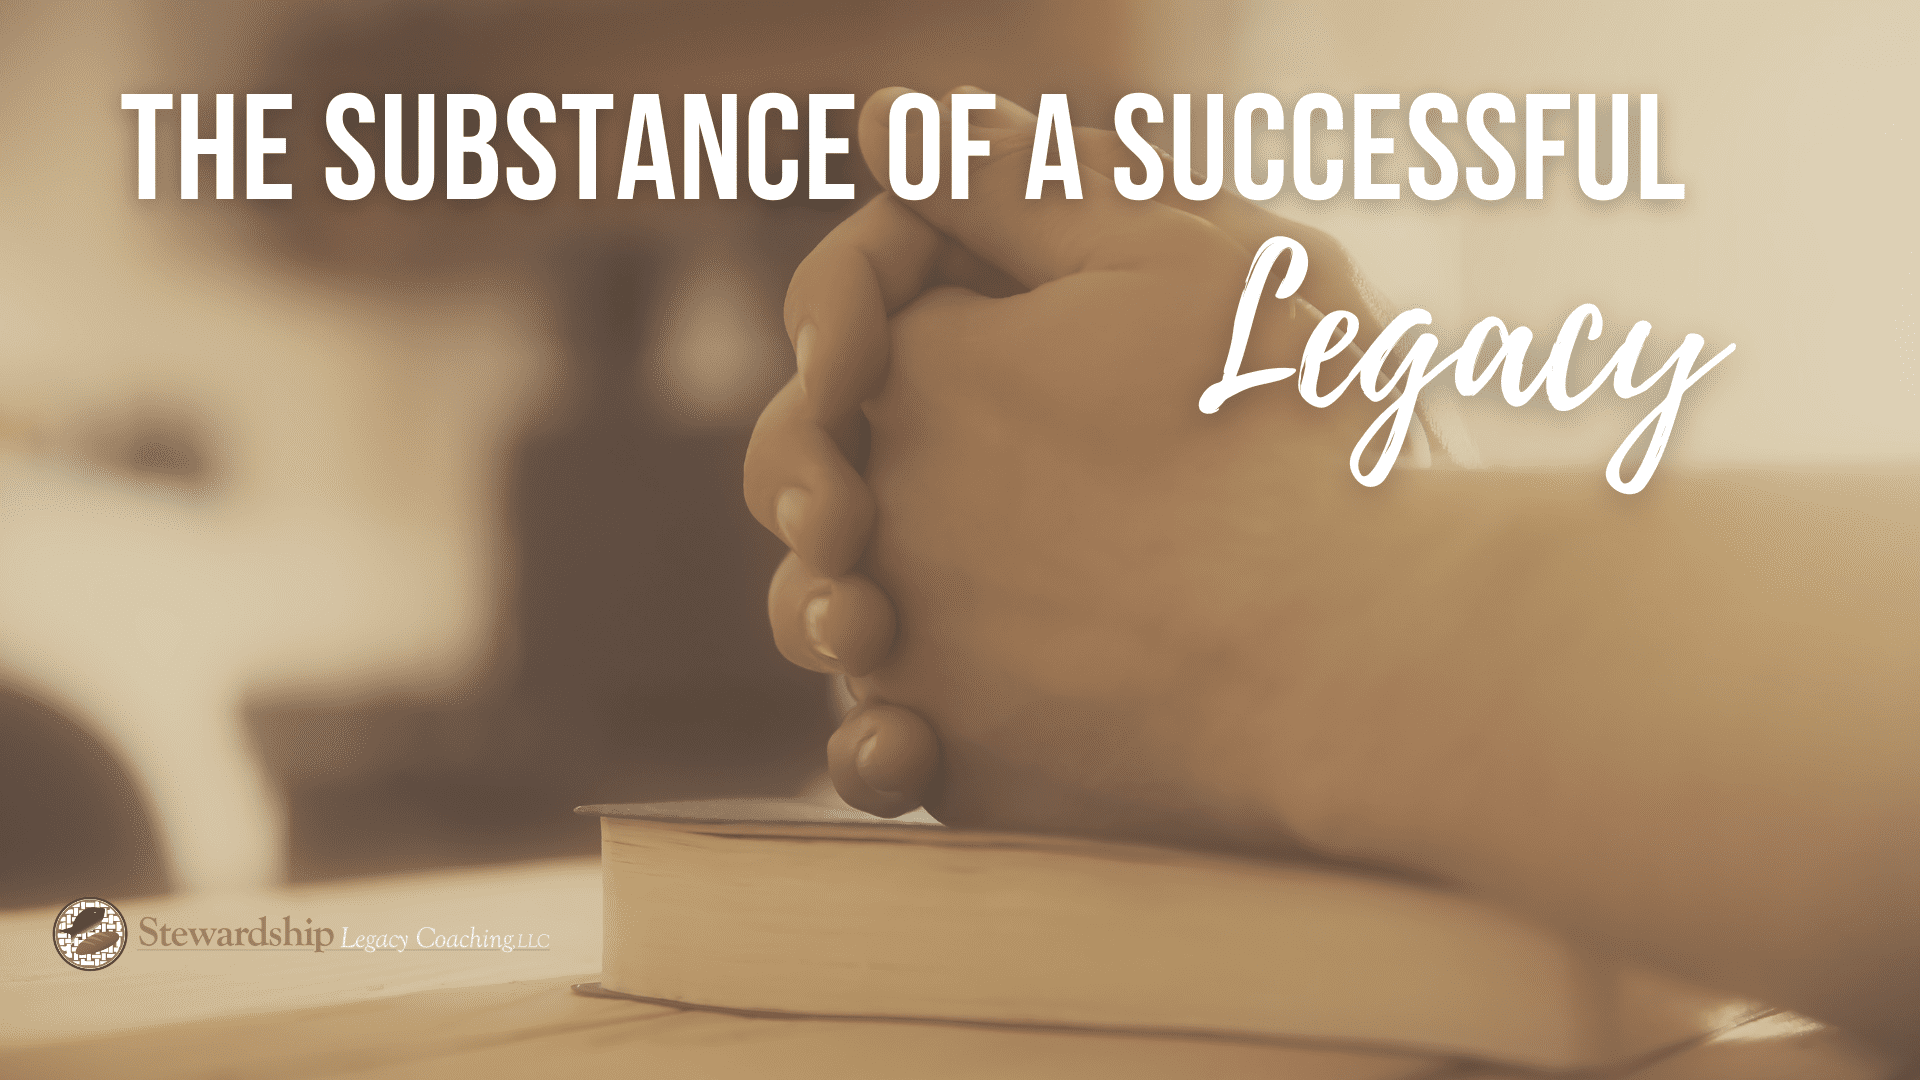 The substance of a successful legacy